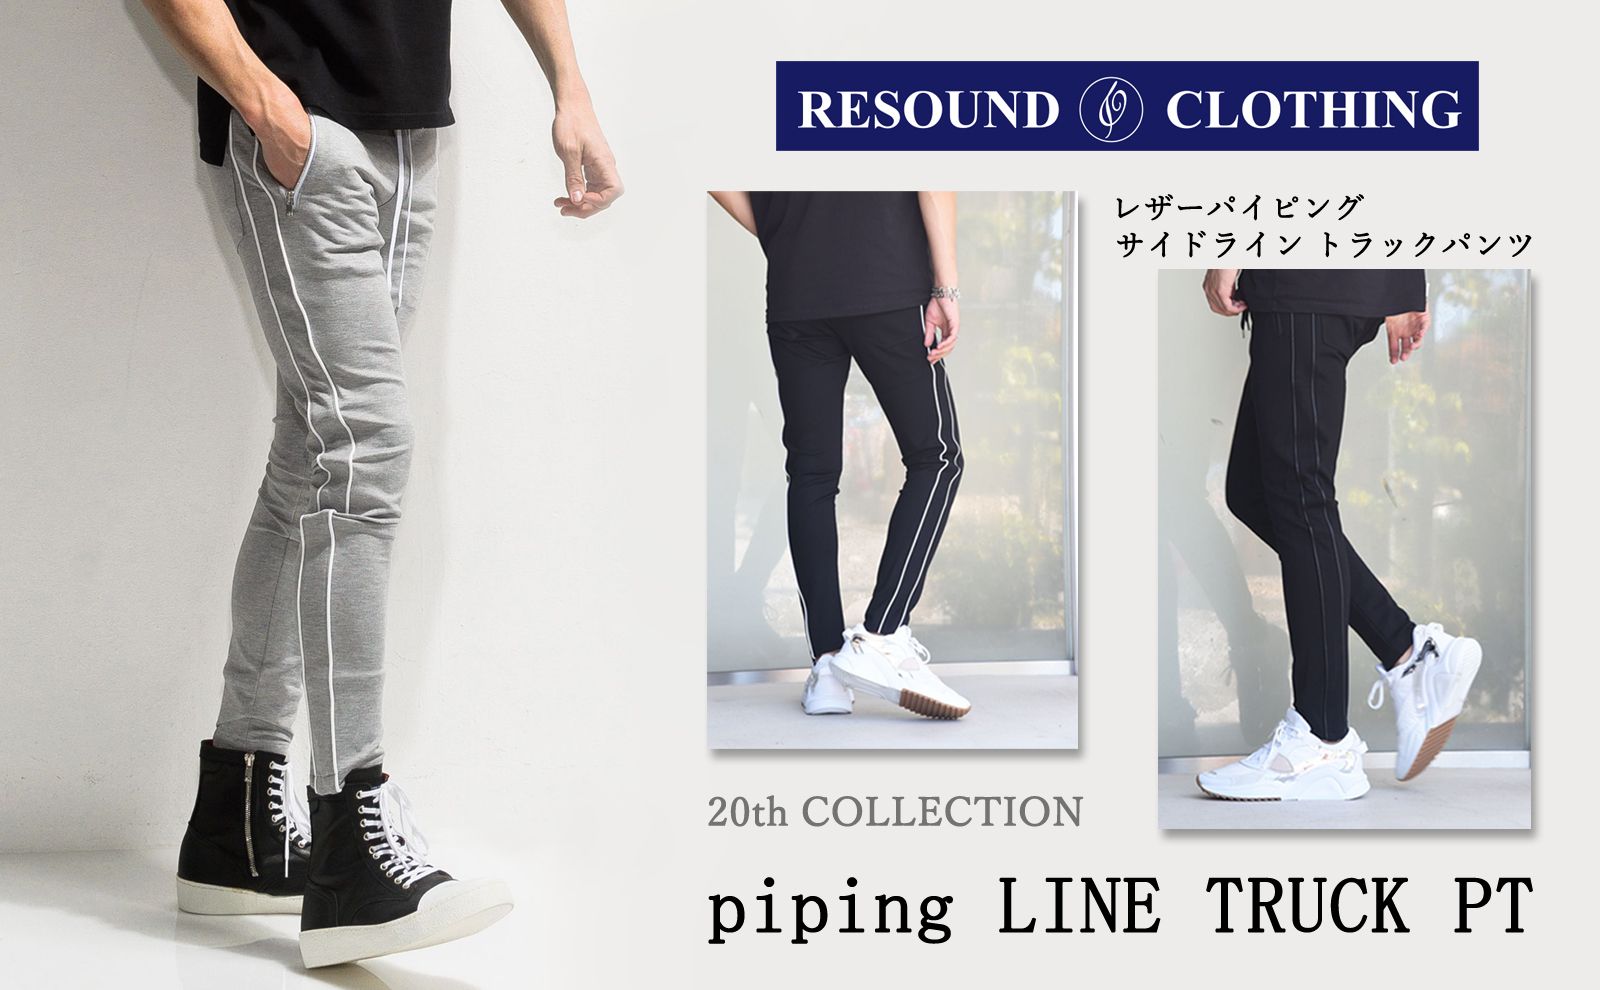 RESOUND CLOTHING PIPING LINE TRUCK PT